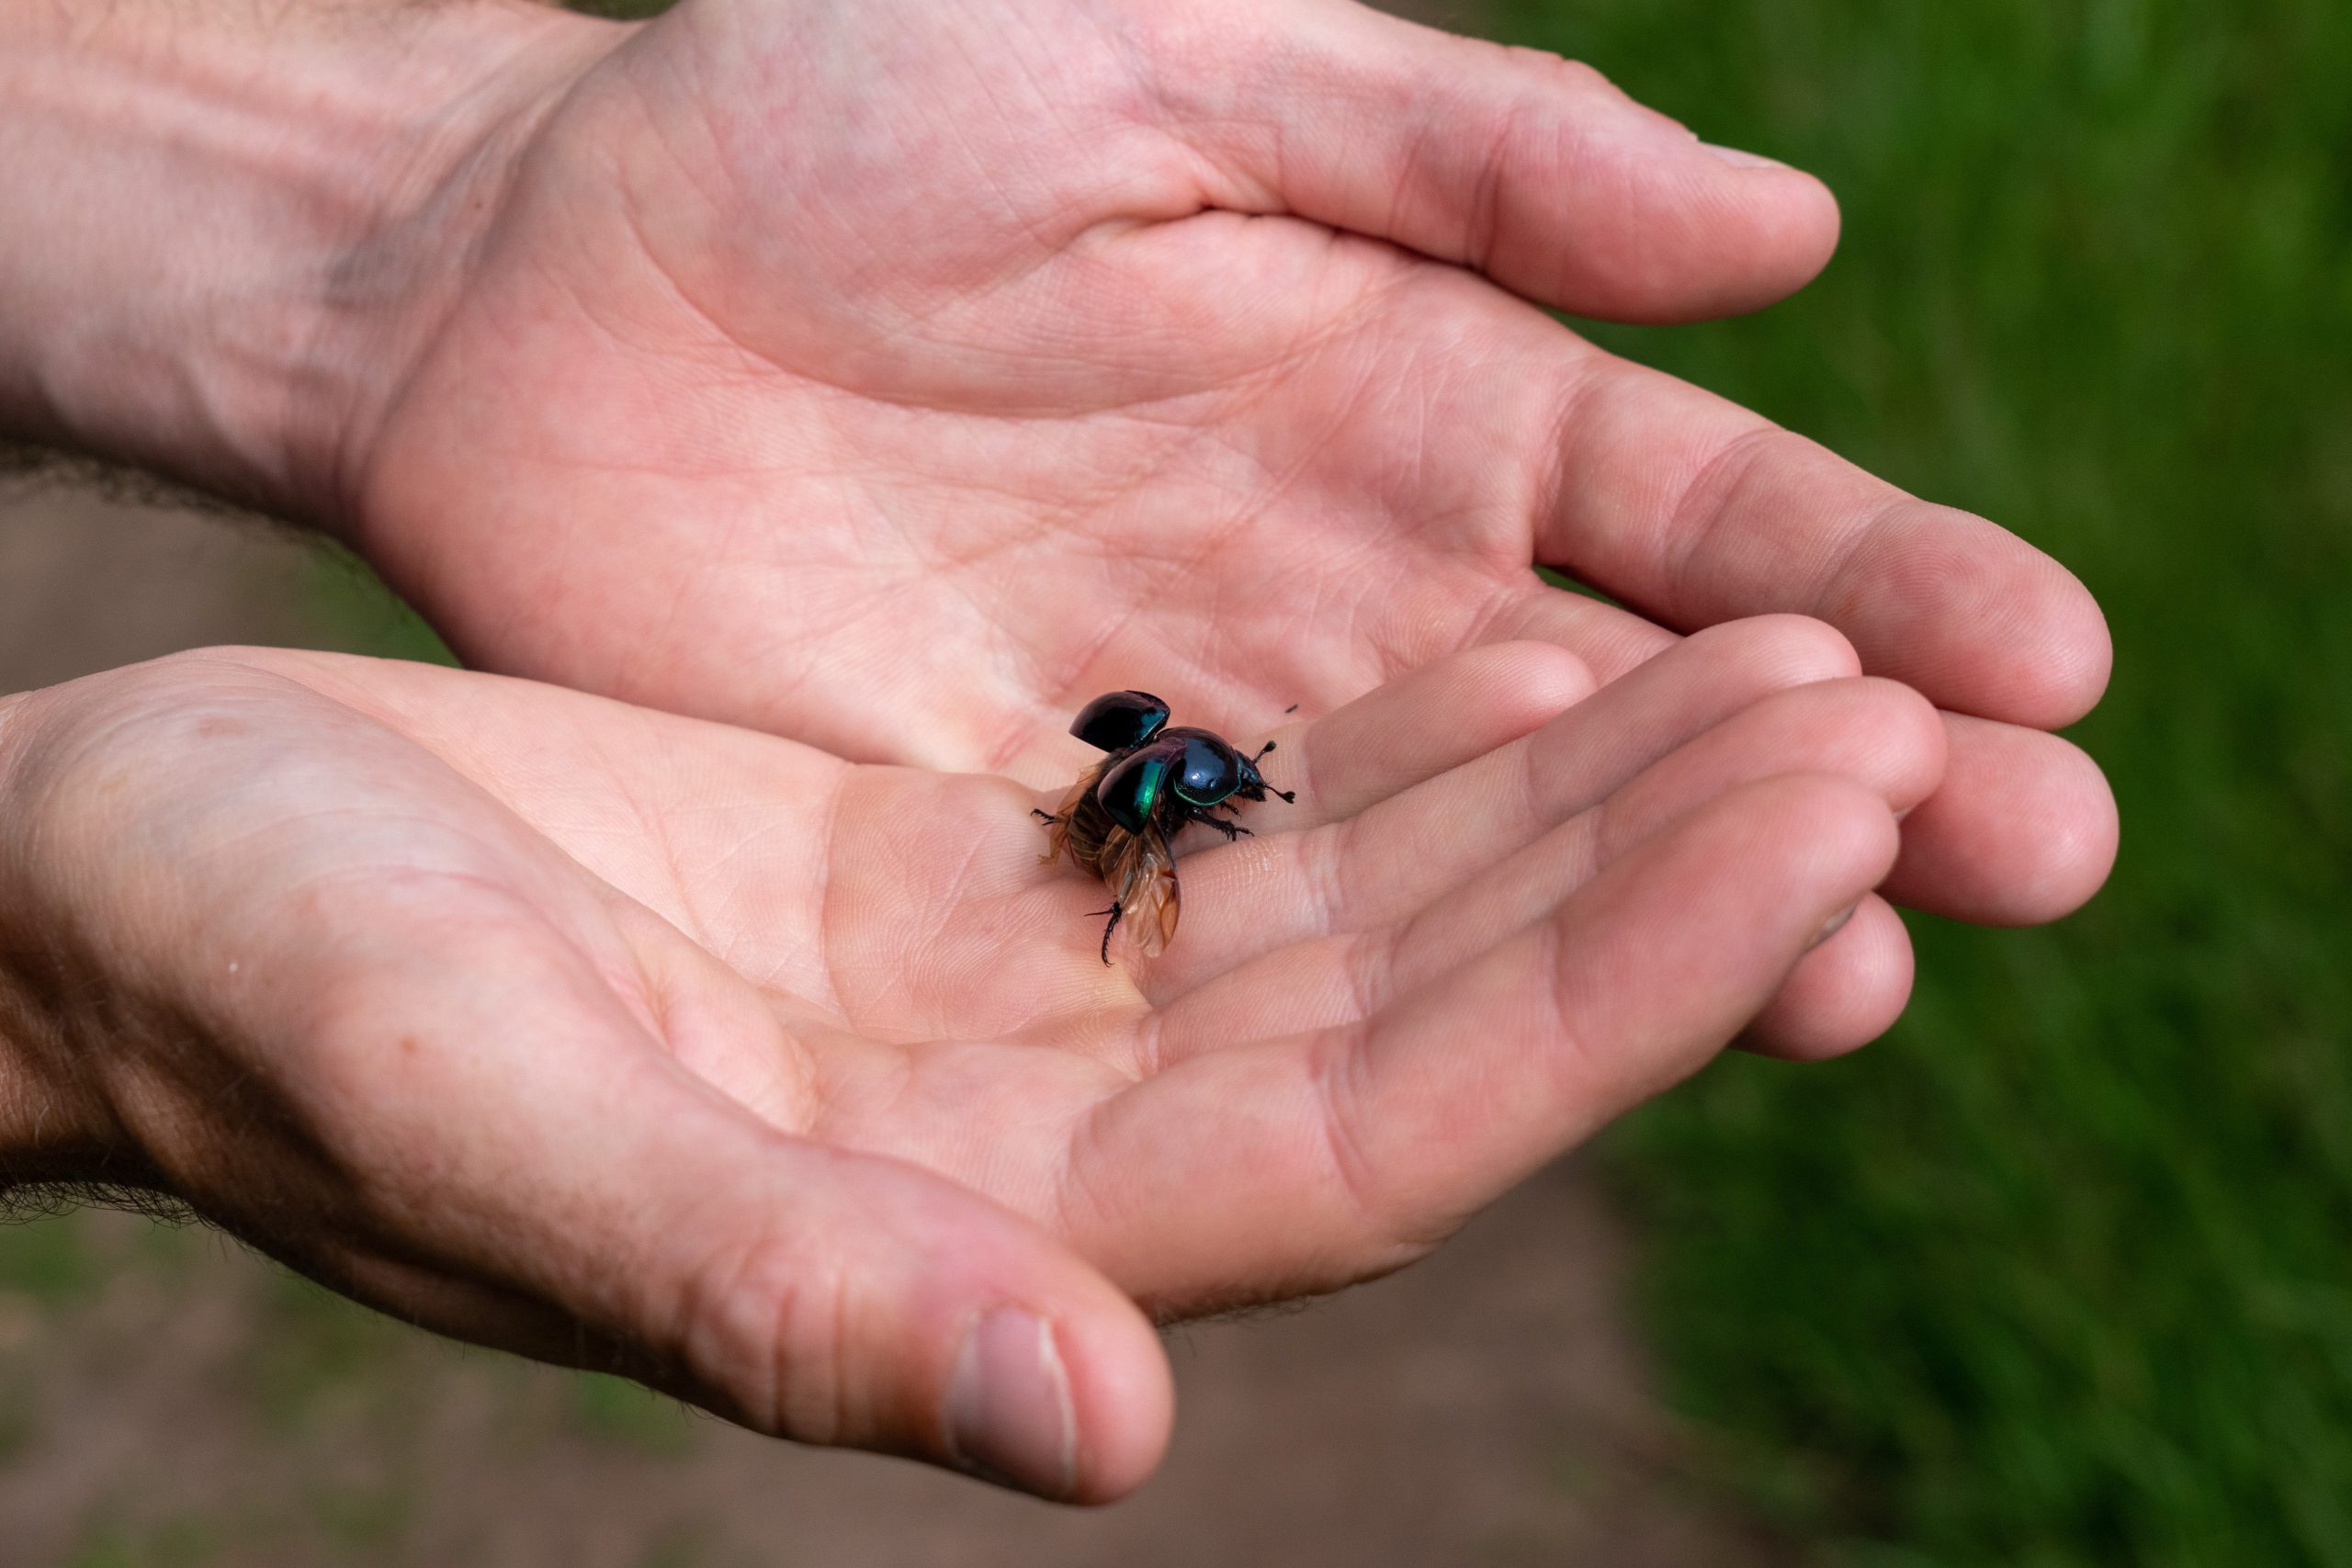 A small bug in a man's hands